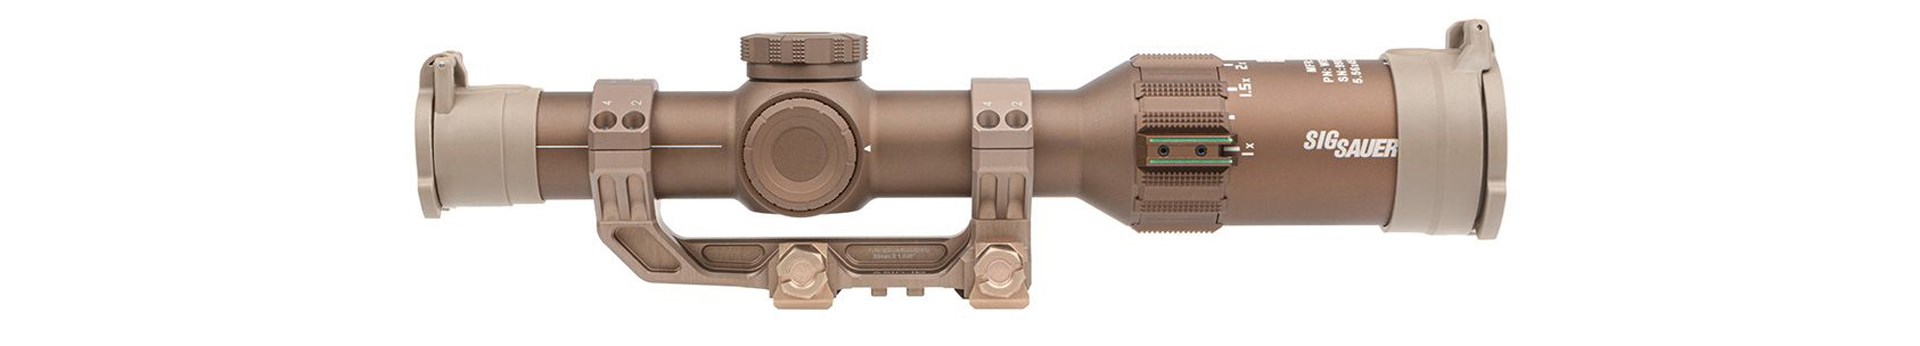 sig sauer tango6t optic riflescope lpvo left-side image brown scope with alpha4 mount attached